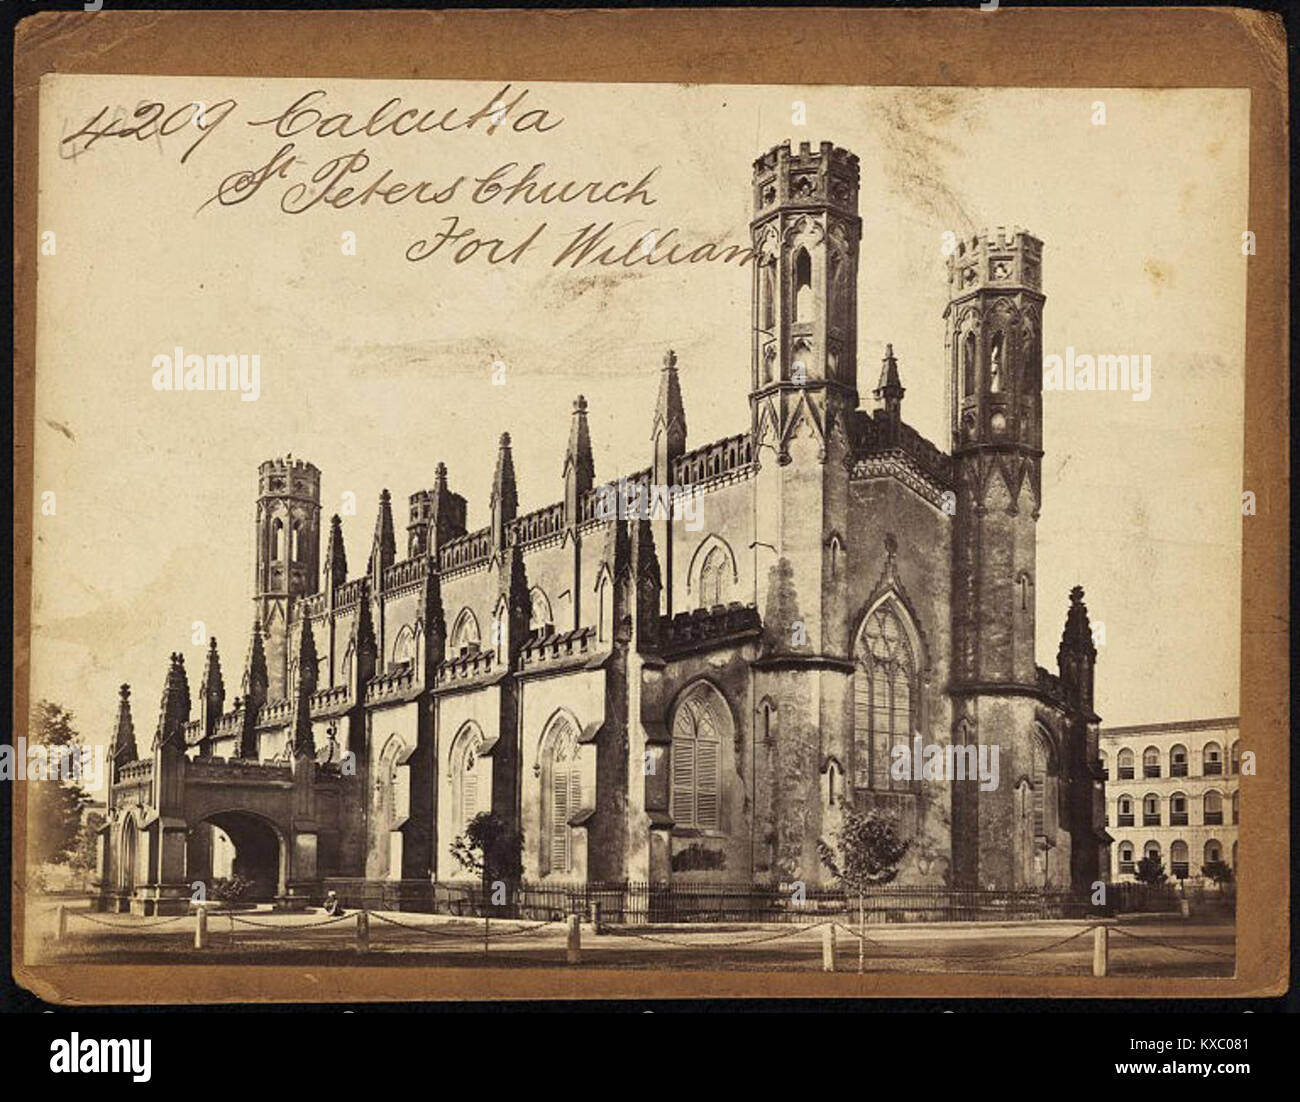 St. Peters Church, Fort William, Calcutta by Francis Frith Stock Photo